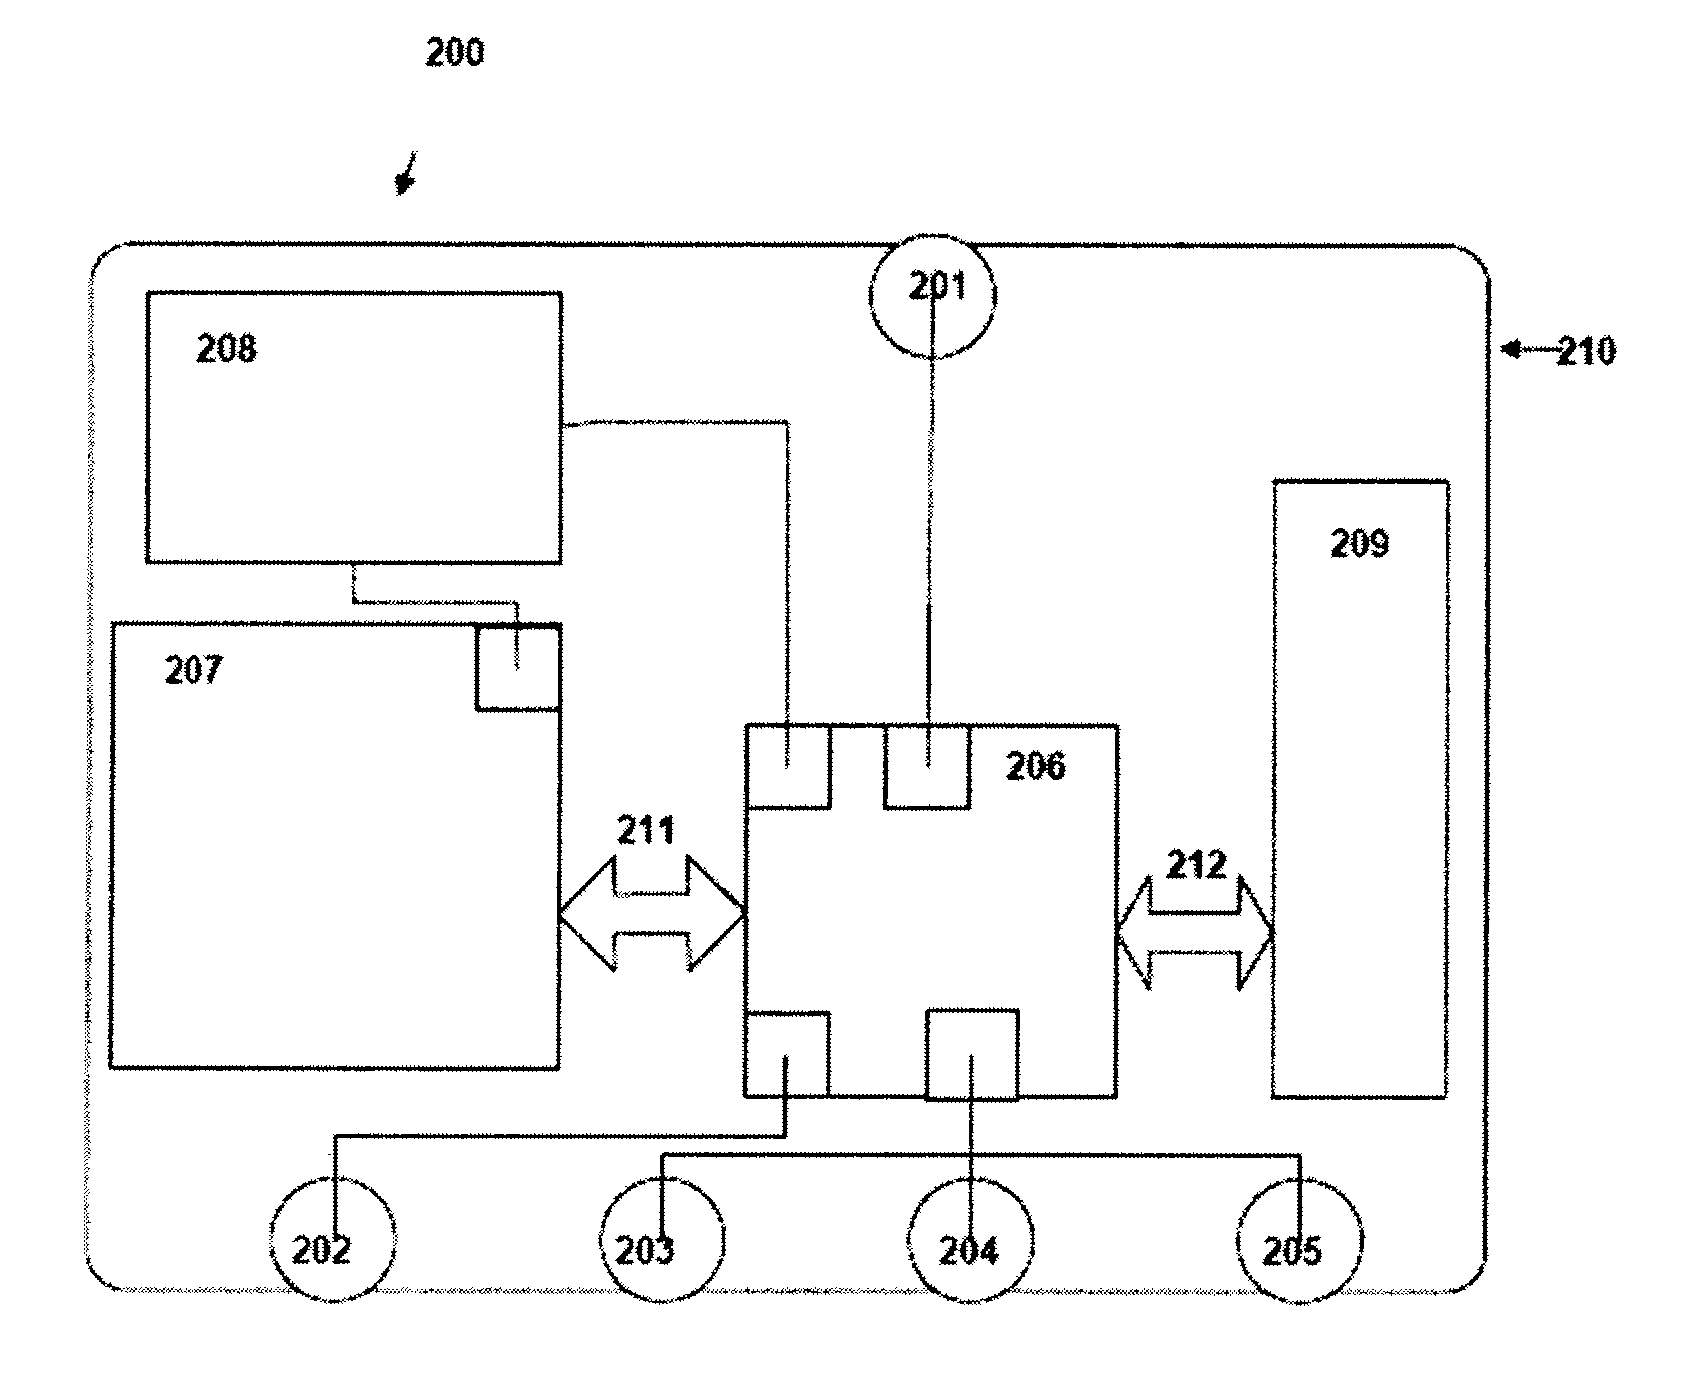 Electronic device and system for detecting rejection in transplant recipients